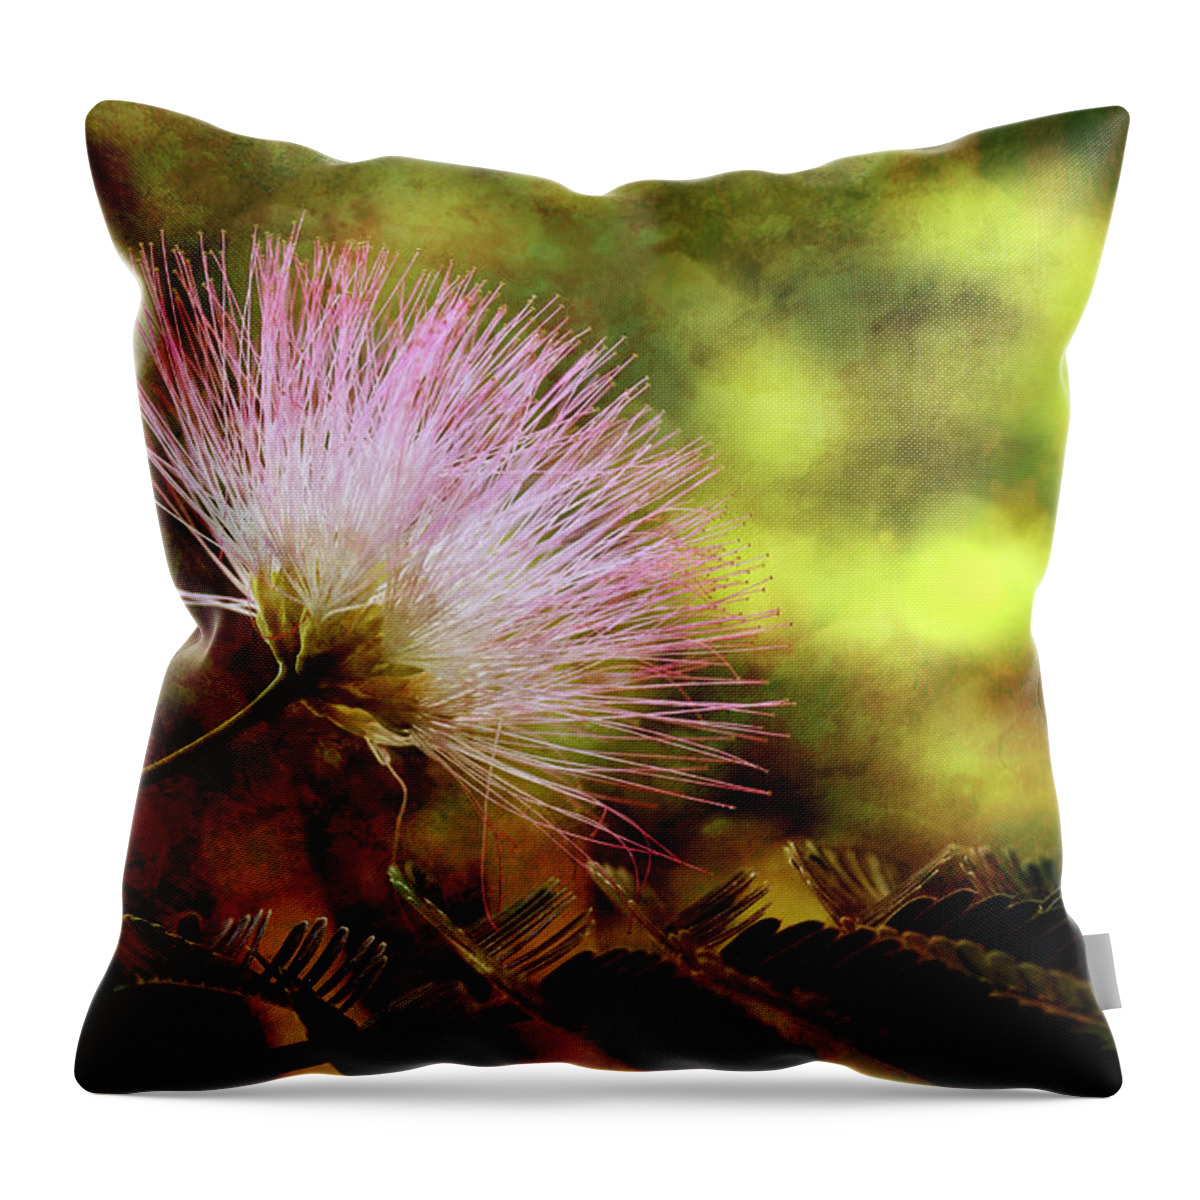 Mimosa Throw Pillow featuring the photograph Time Reaches Forever by Mike Eingle